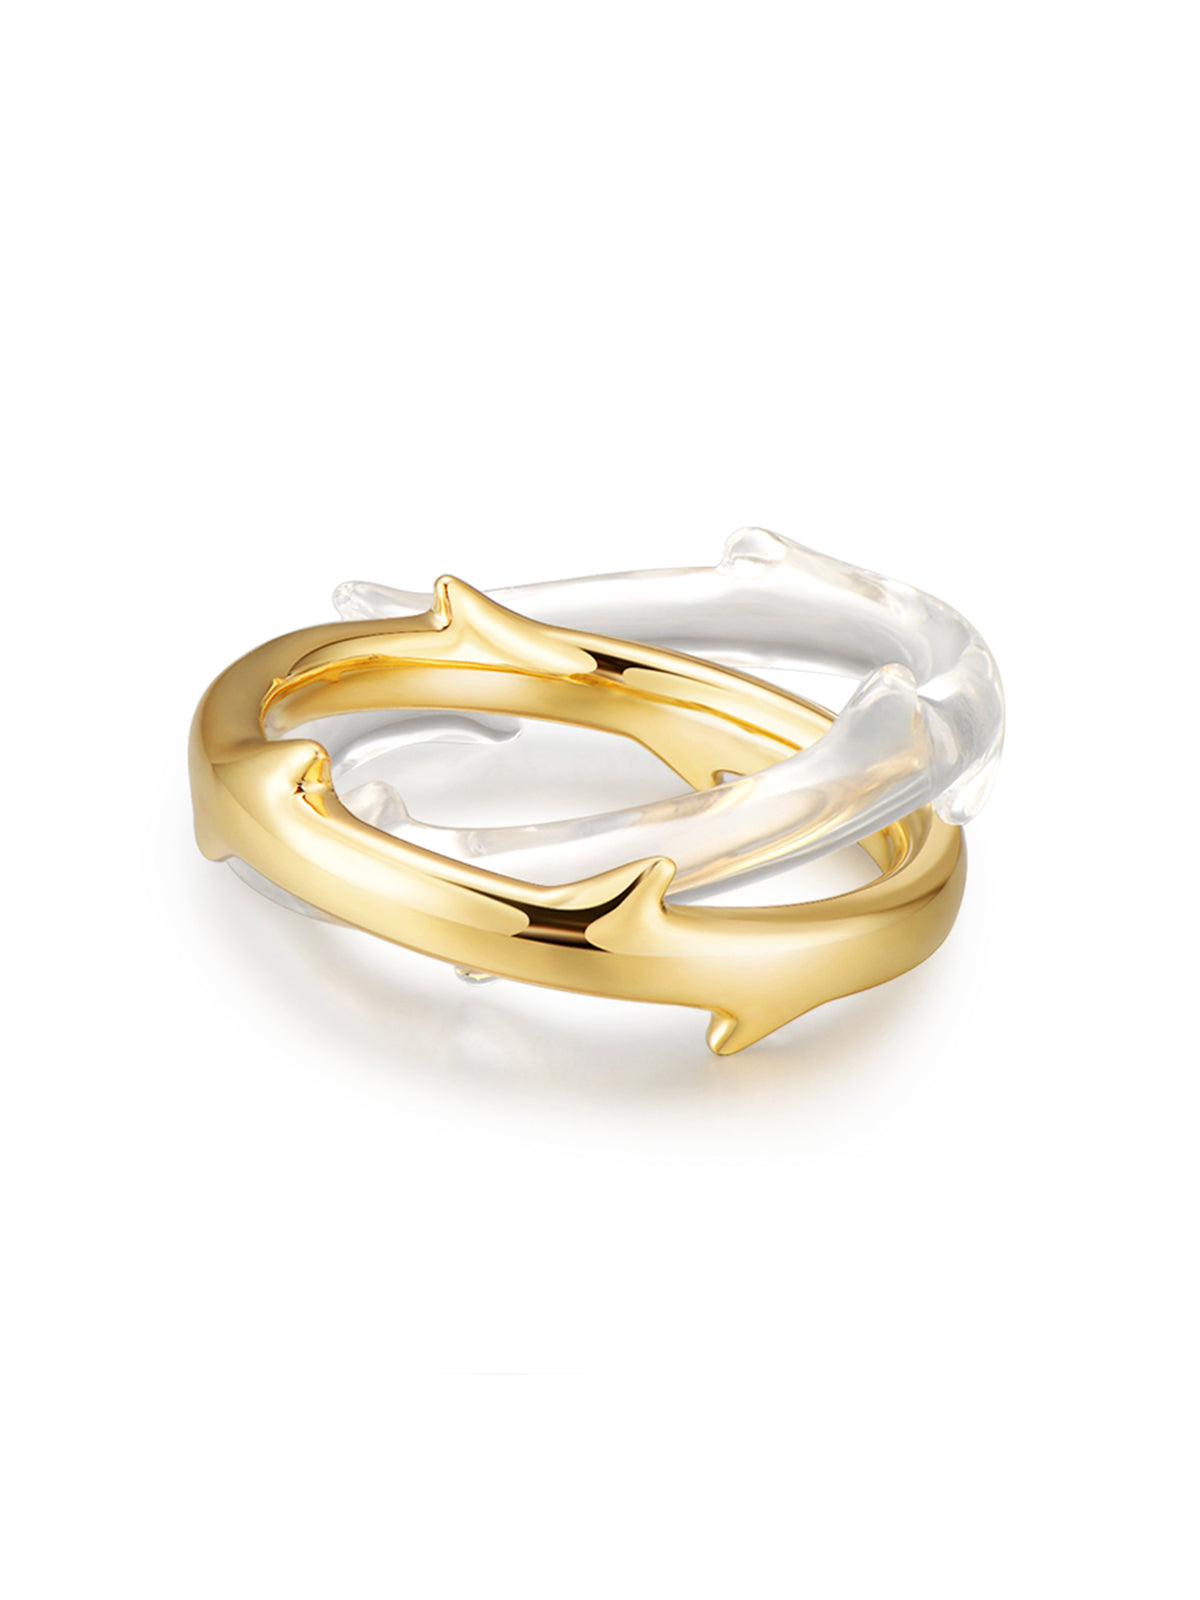 Ring of Thorns Cold Embrace Ring